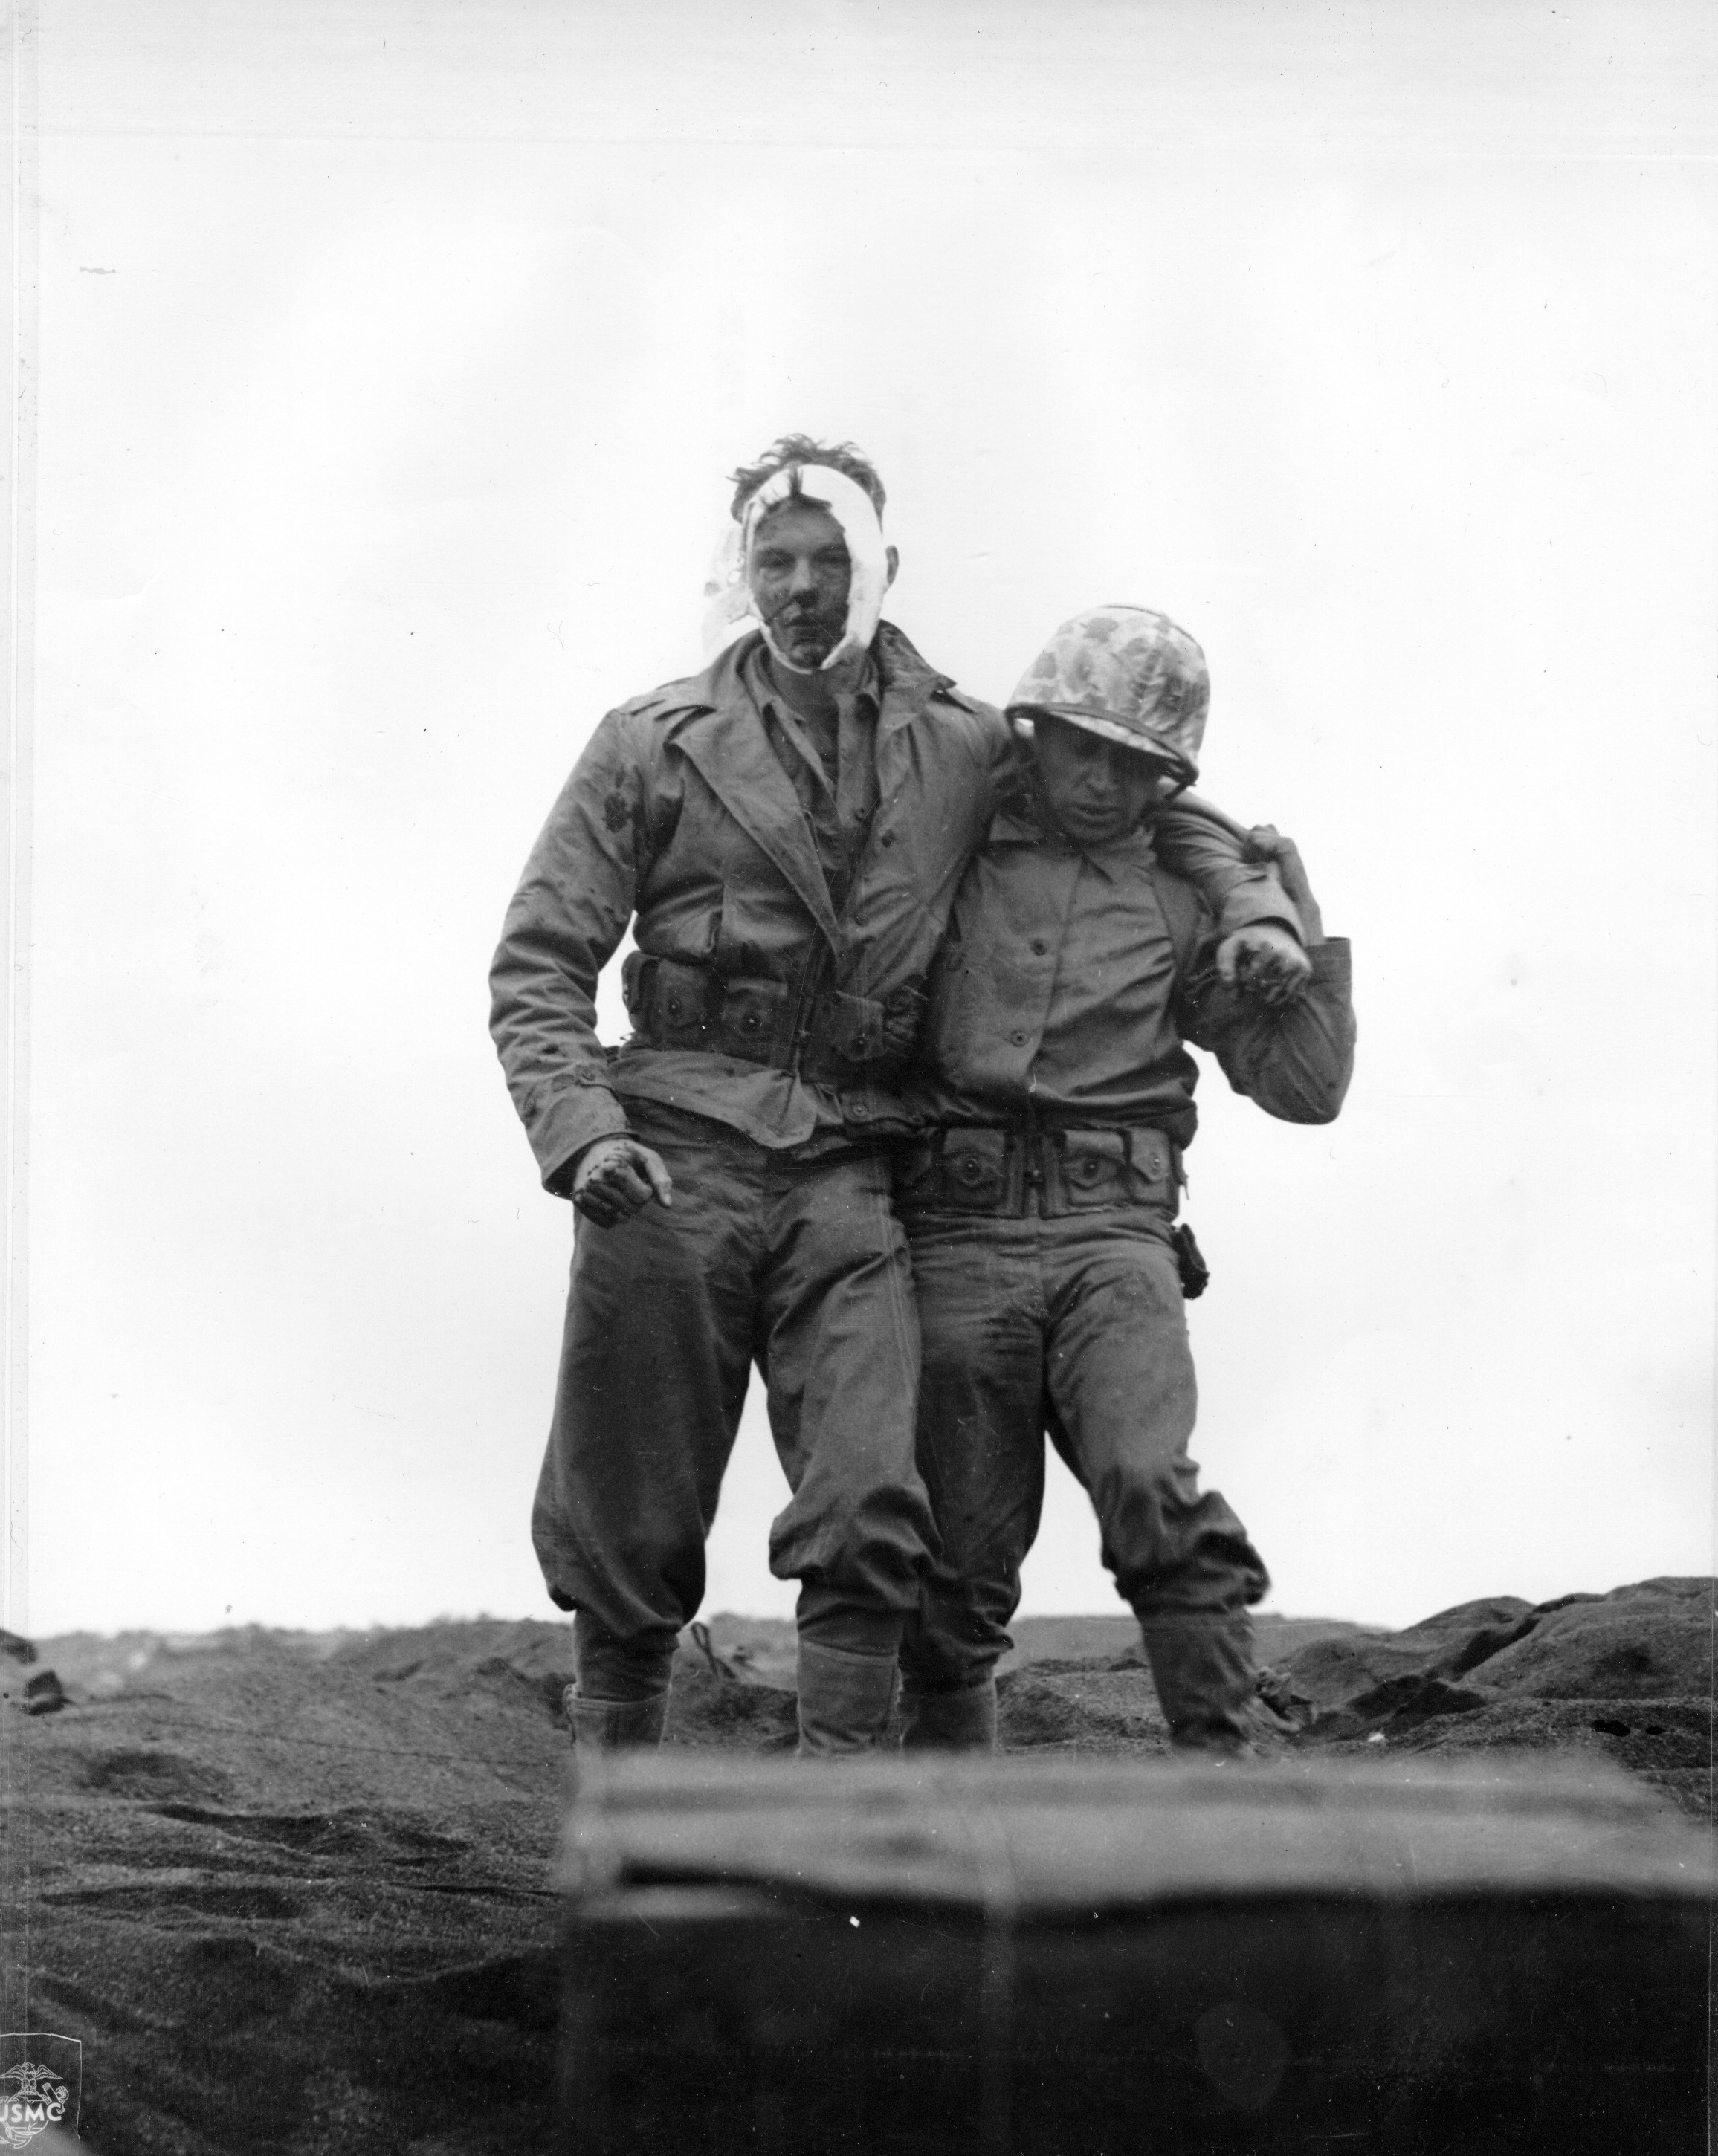 Wounded US Marine being helped by a comrade, Iwo Jima, Japan, 20 Feb 1945